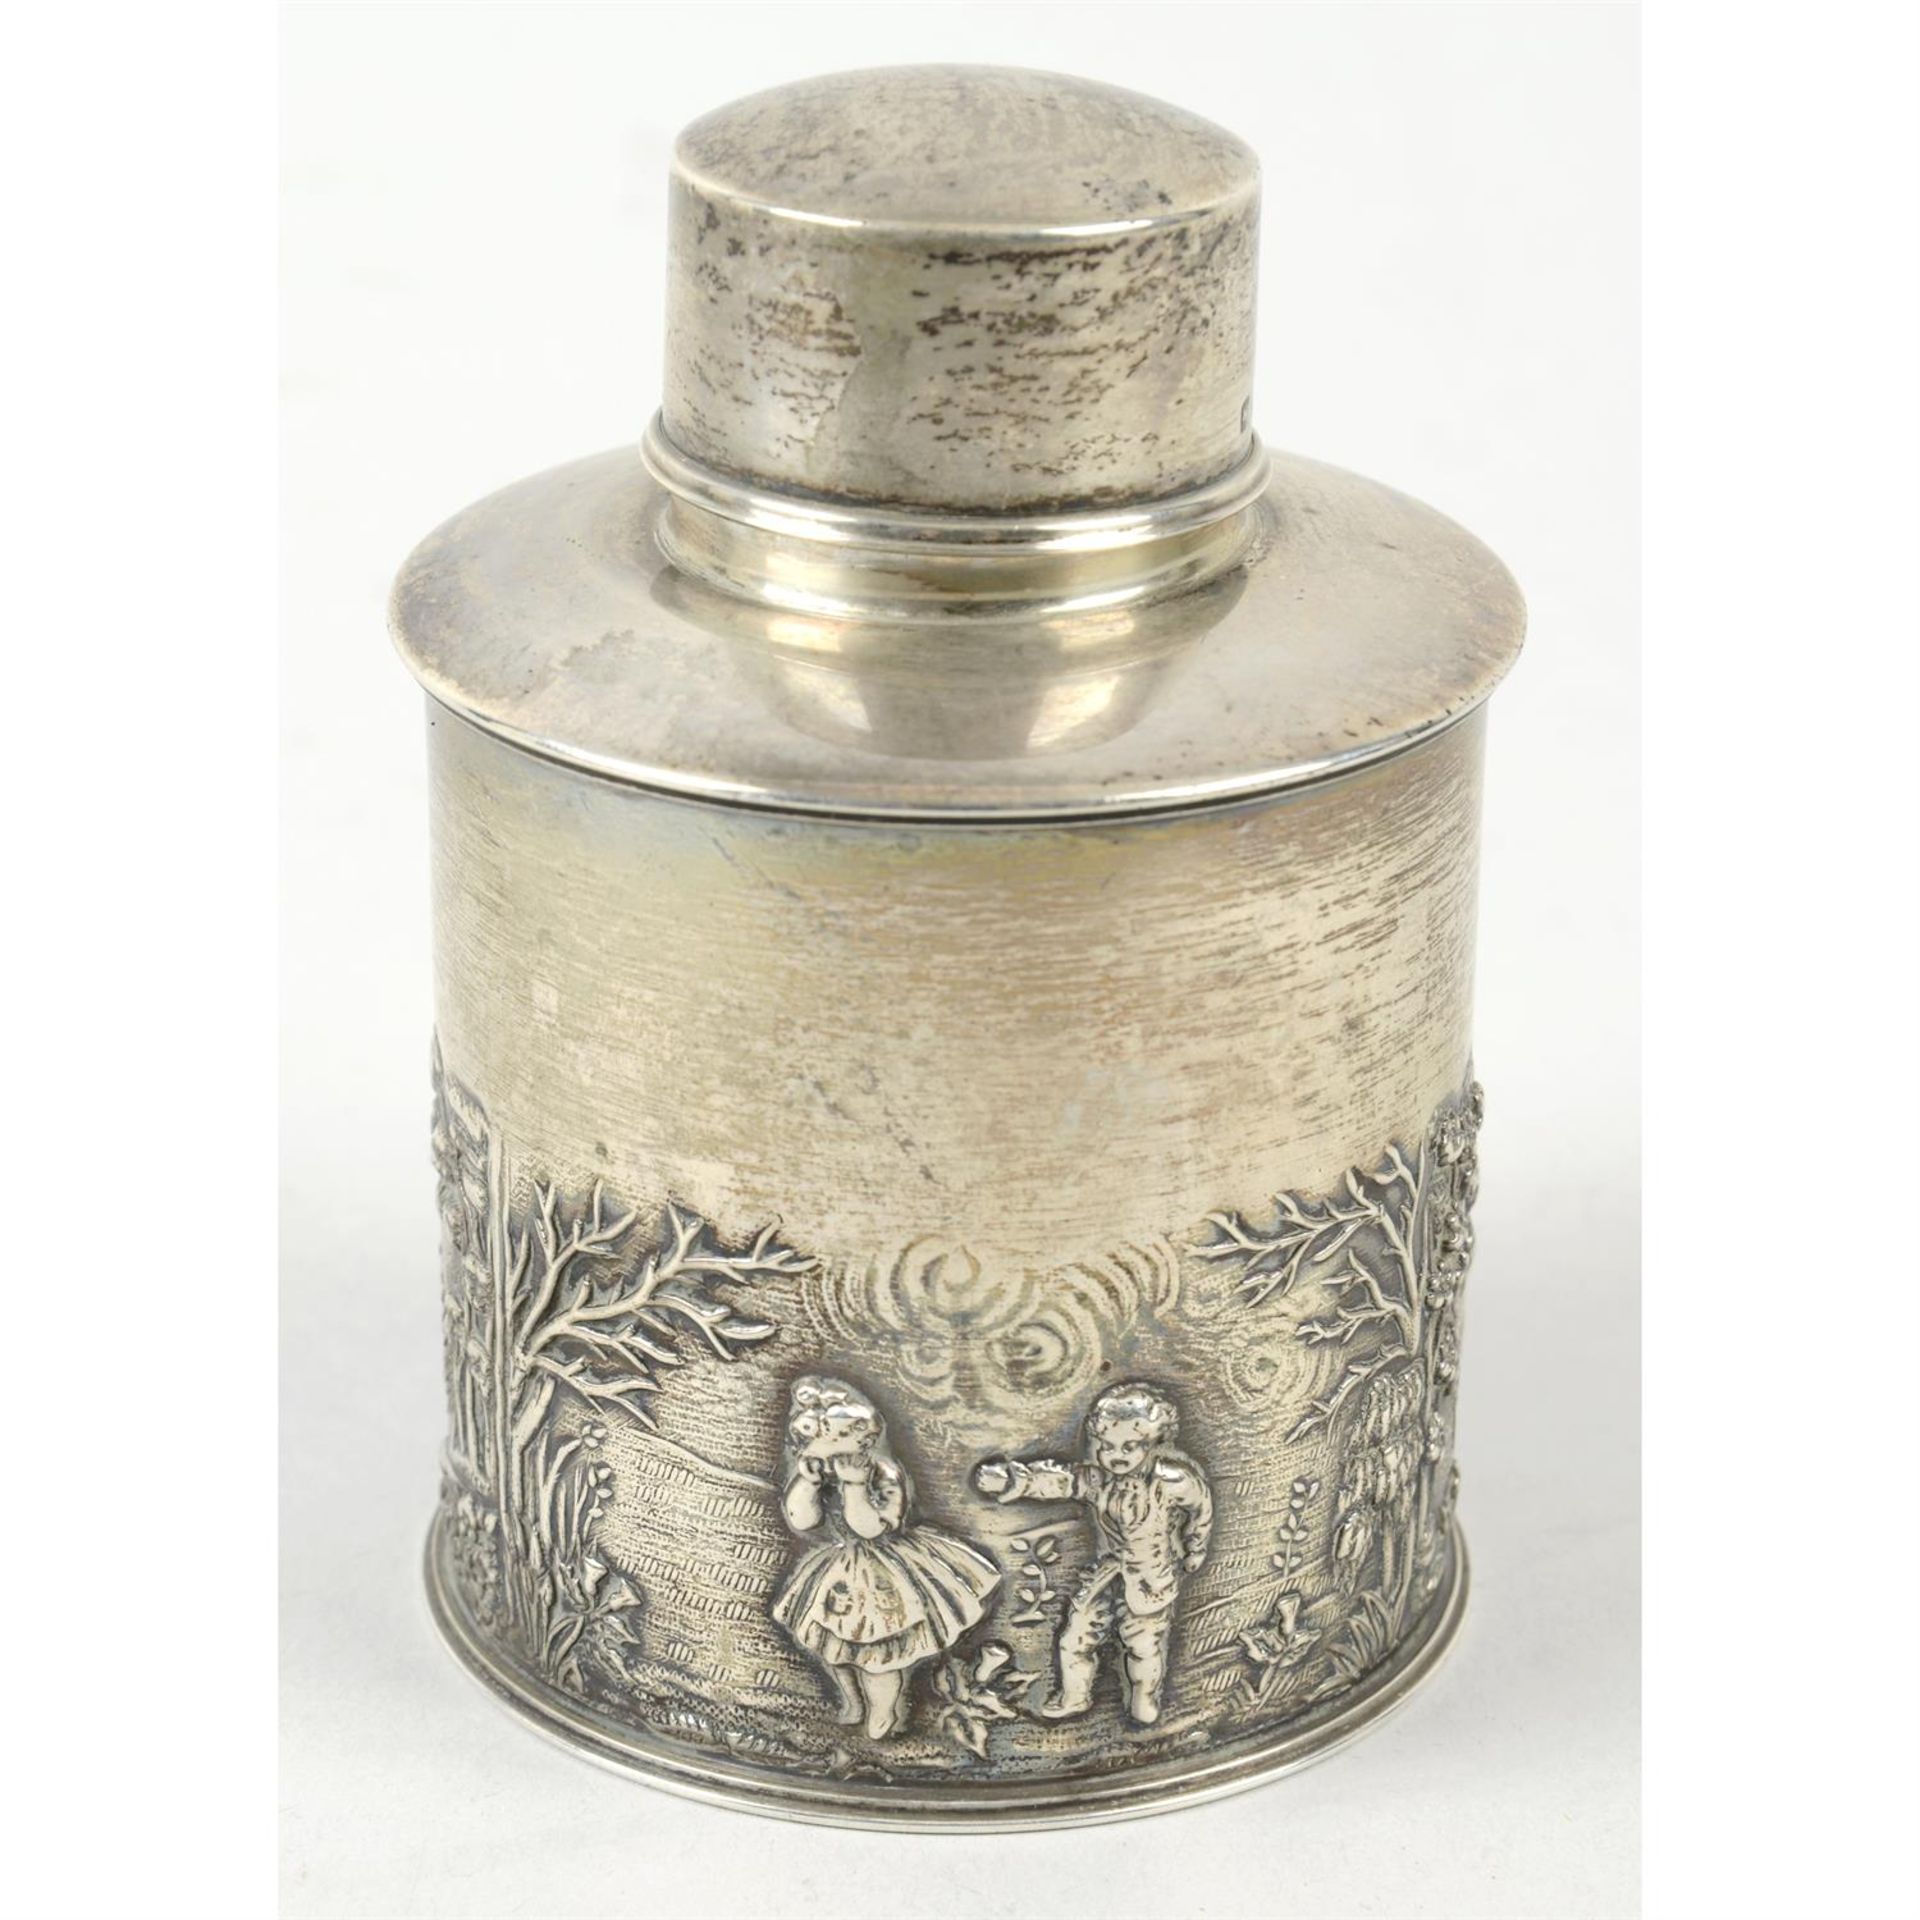 An Edwardian silver tea caddy with chased decoration.